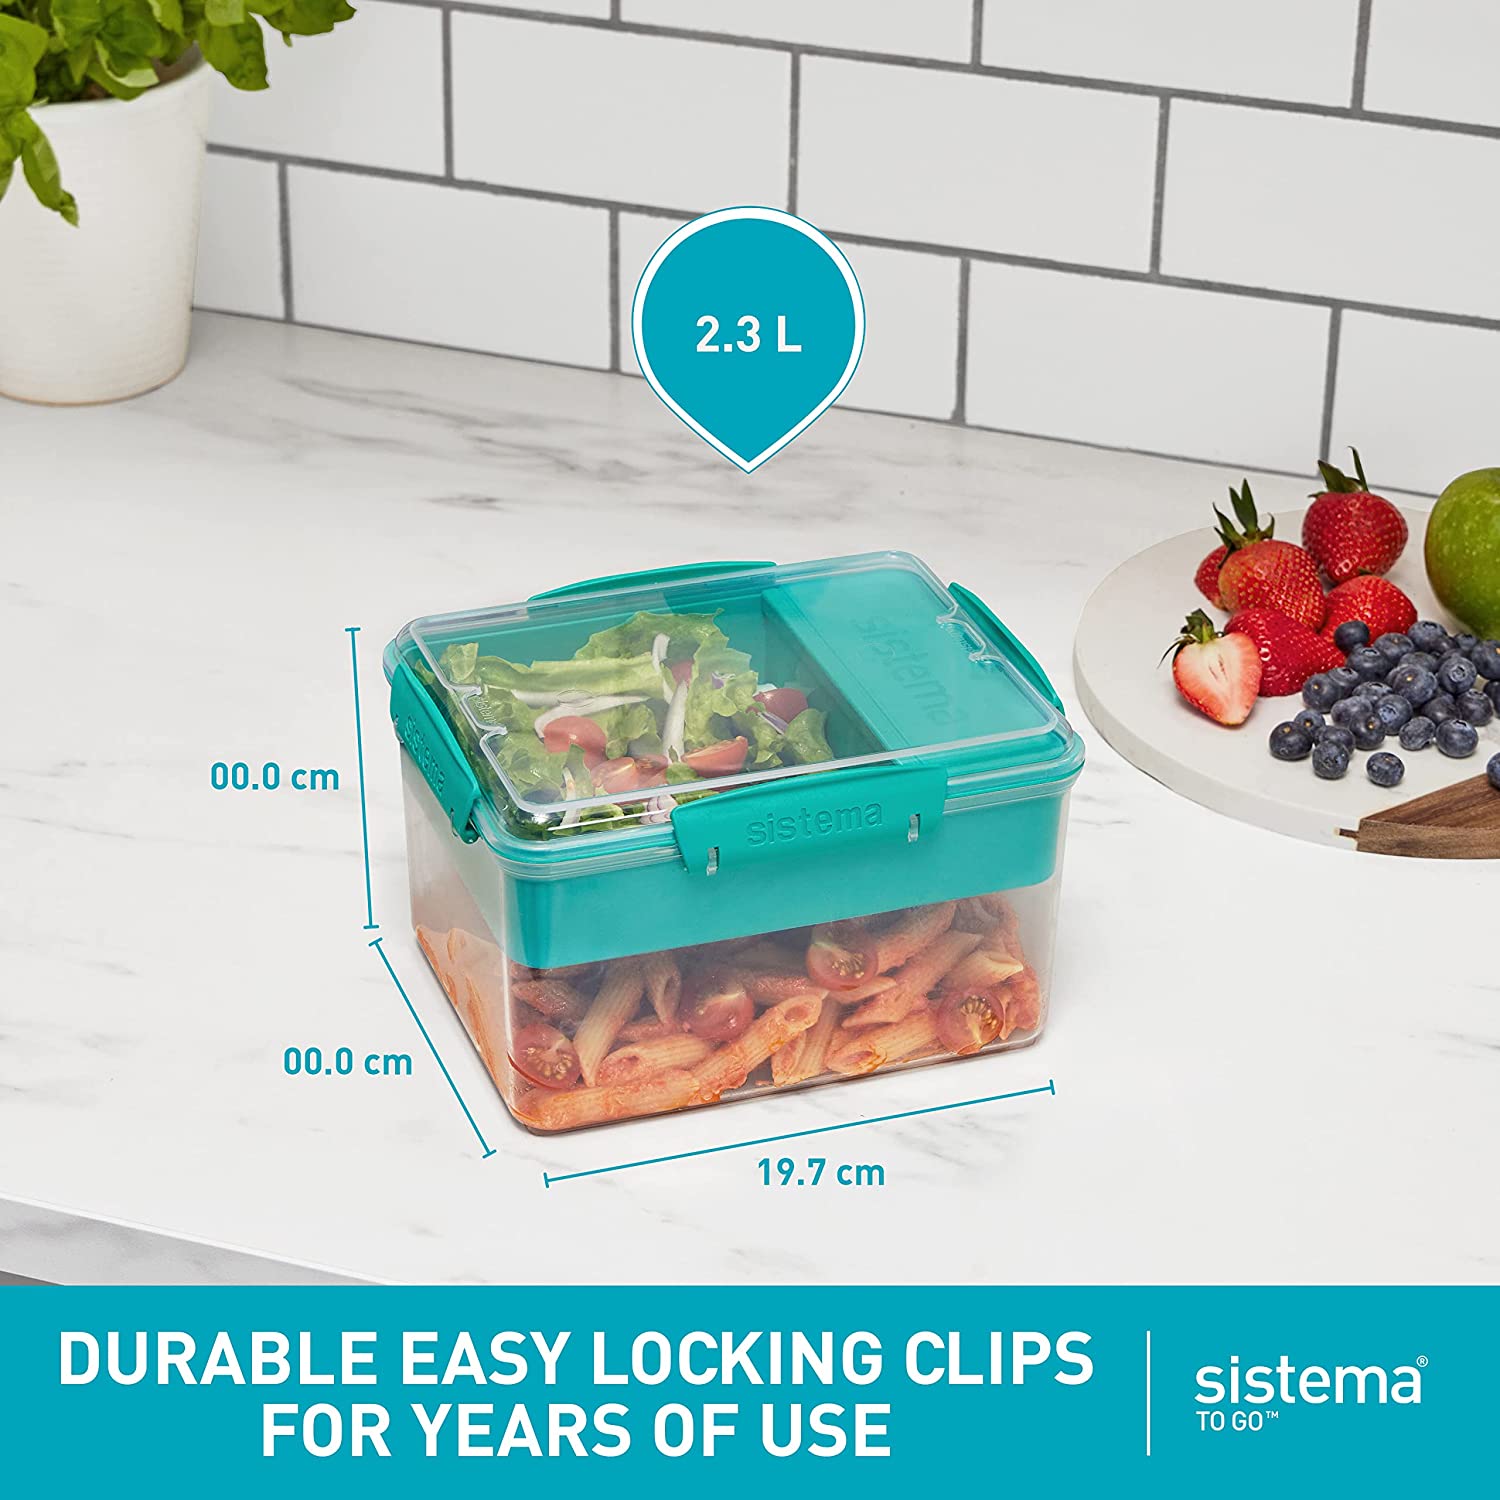 Sistema Lunch Cube To Go, 1.4 Liters - Available in Several Colors – KATEI  UAE